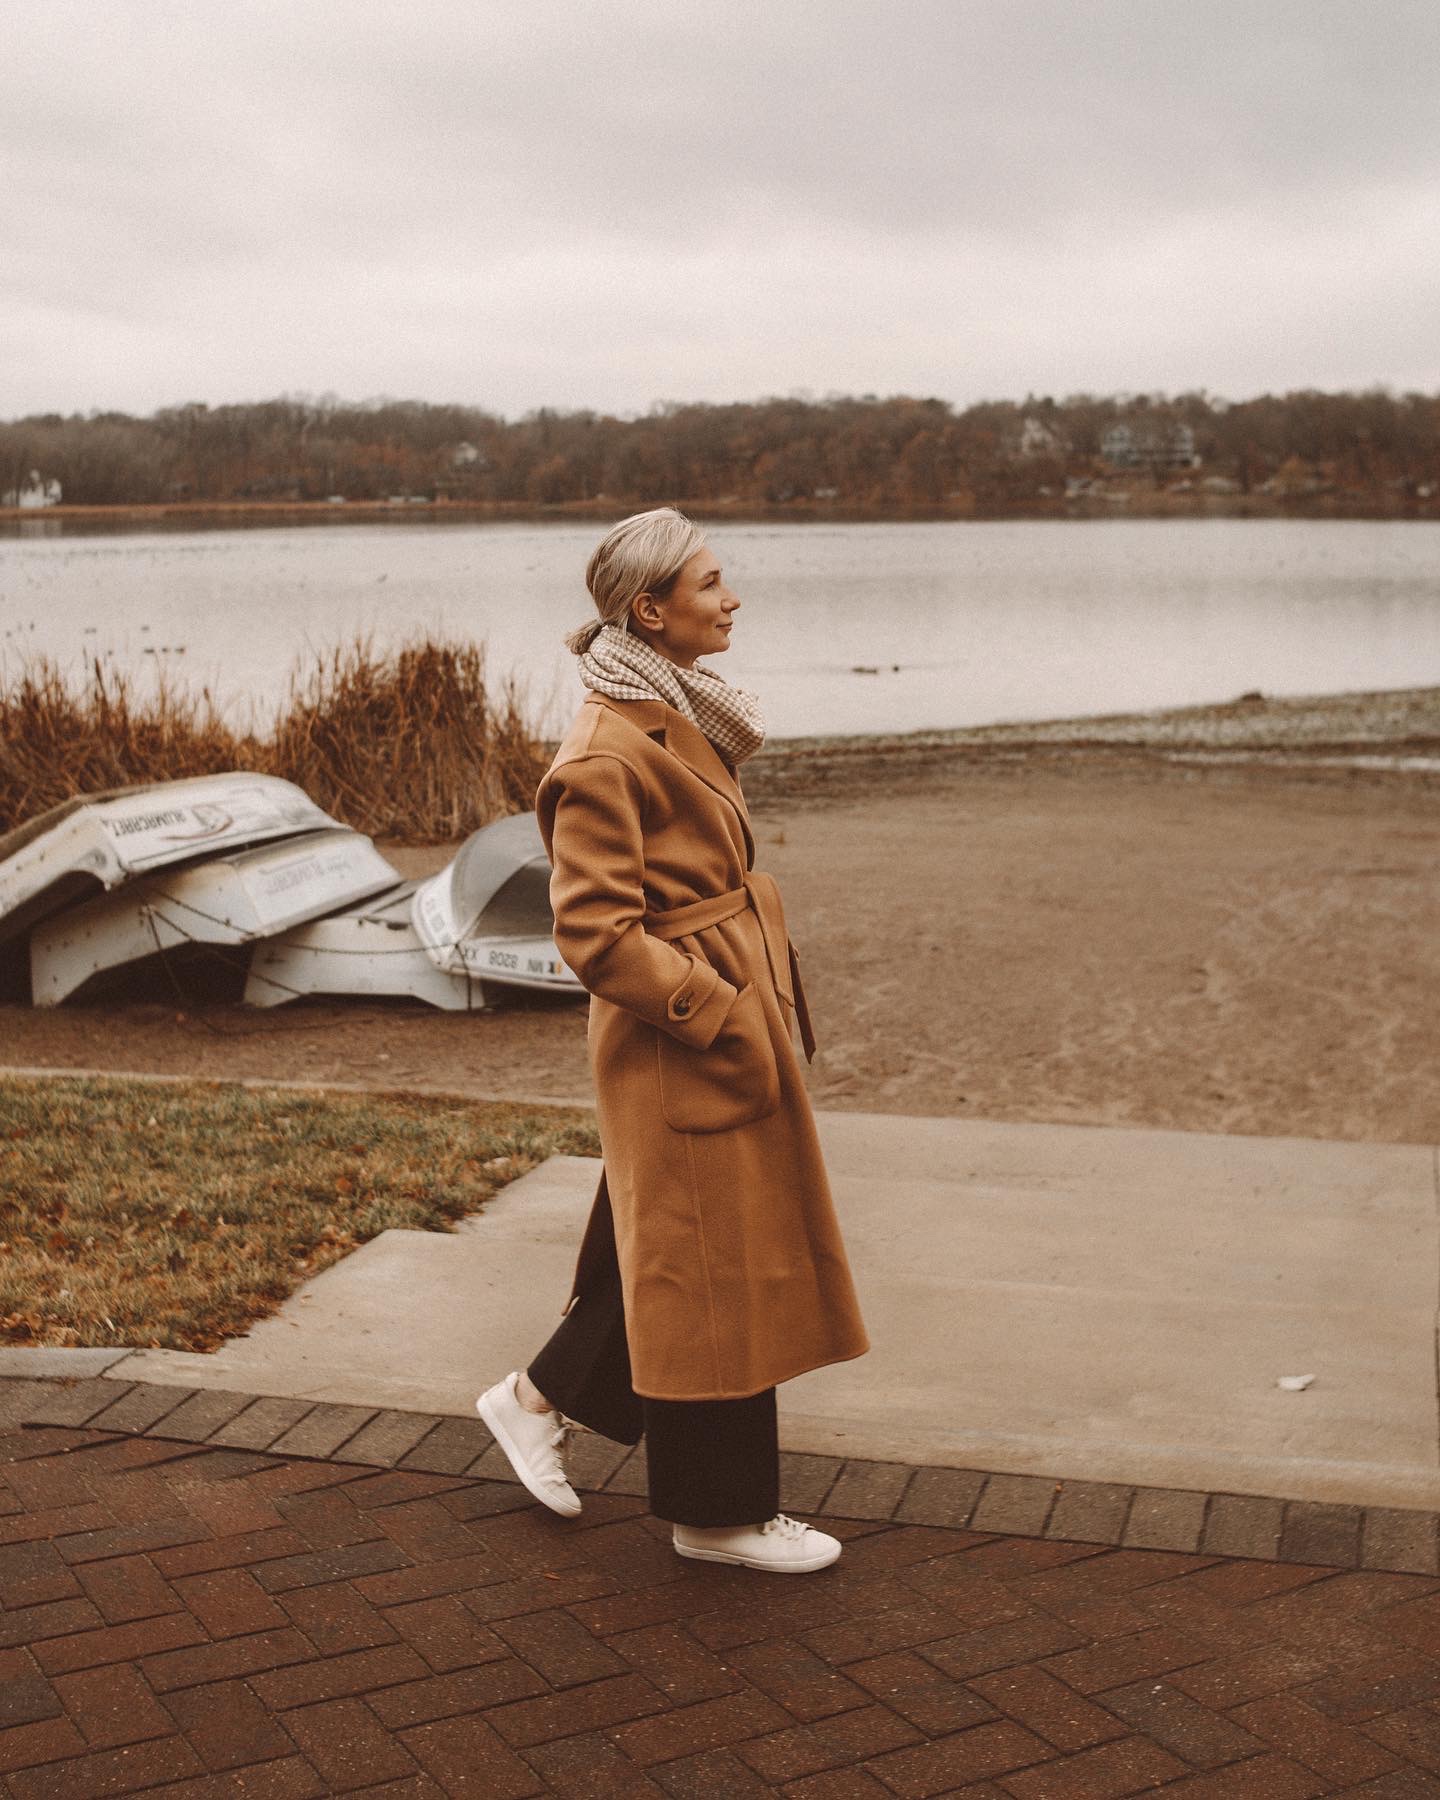 Karin Emily wears a houndstooth scarf, camel colored wool coat, black wide leg pants, cream colored sneakers